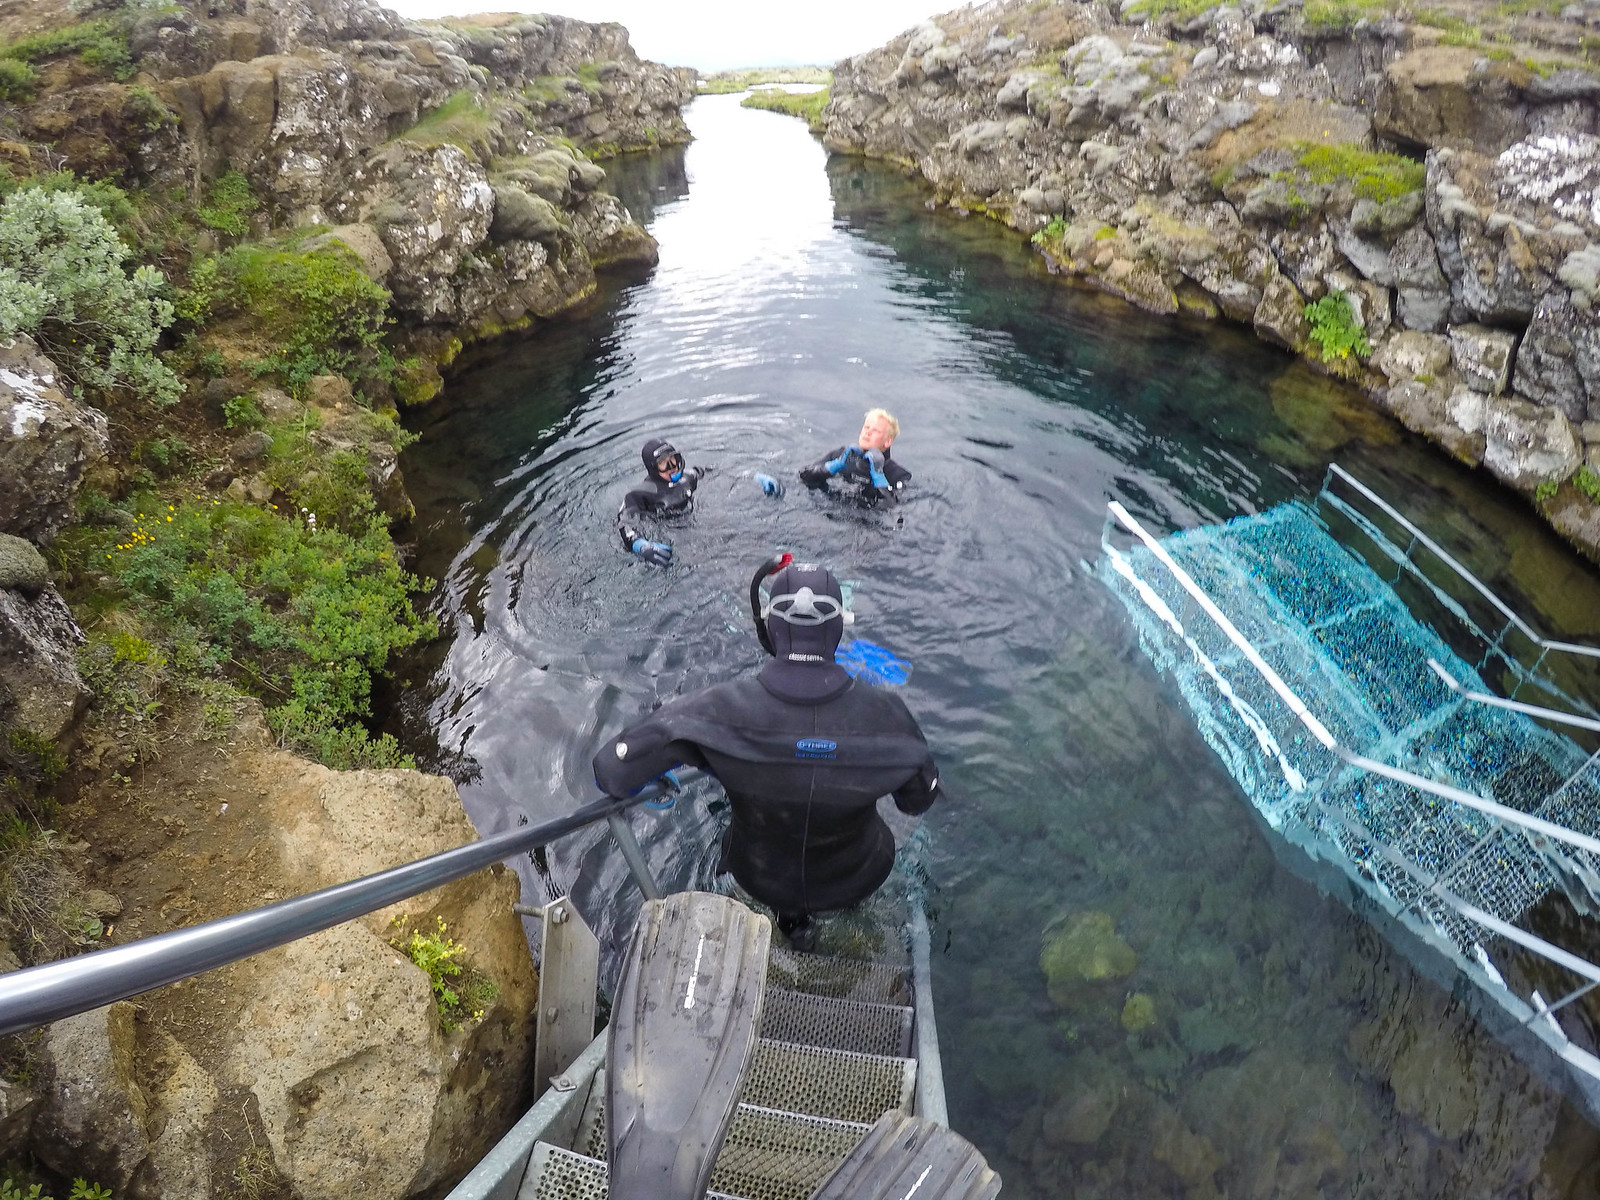 Snorkeling in Iceland's Silfra fissure